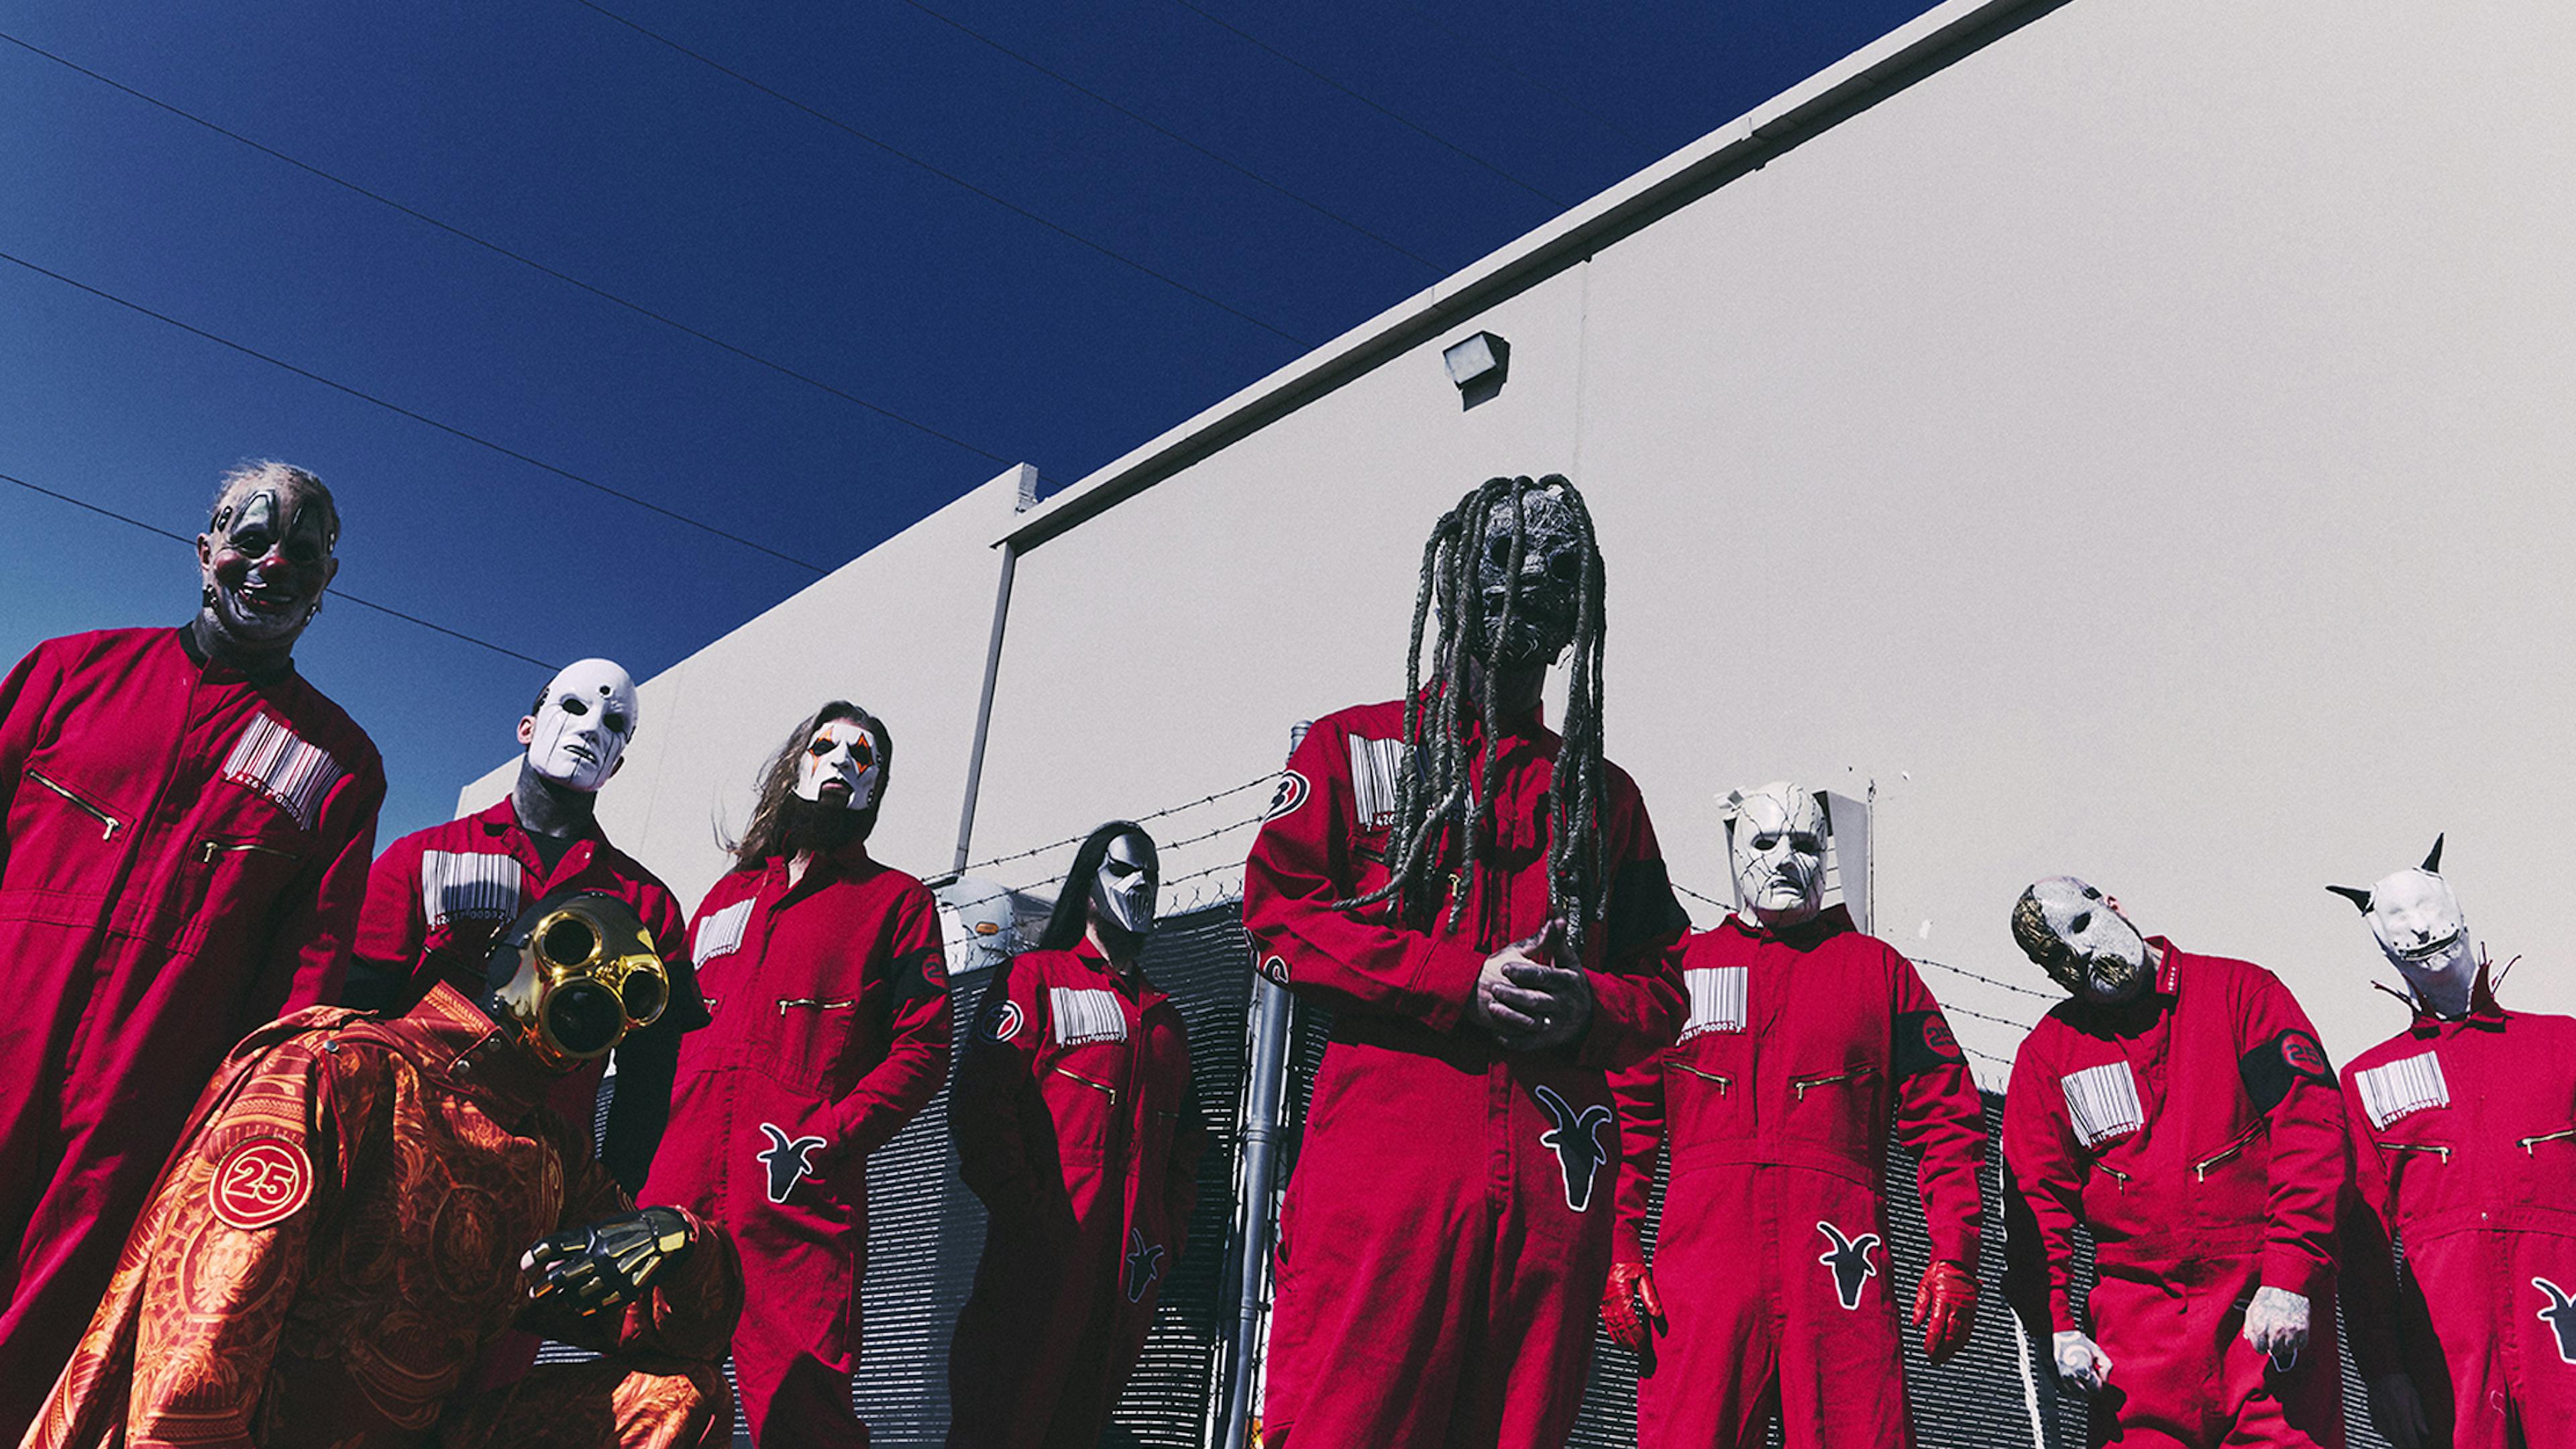 Eloy Casagrande reveals his Slipknot audition process: “They threw new ideas at me to see what my songwriting was like”